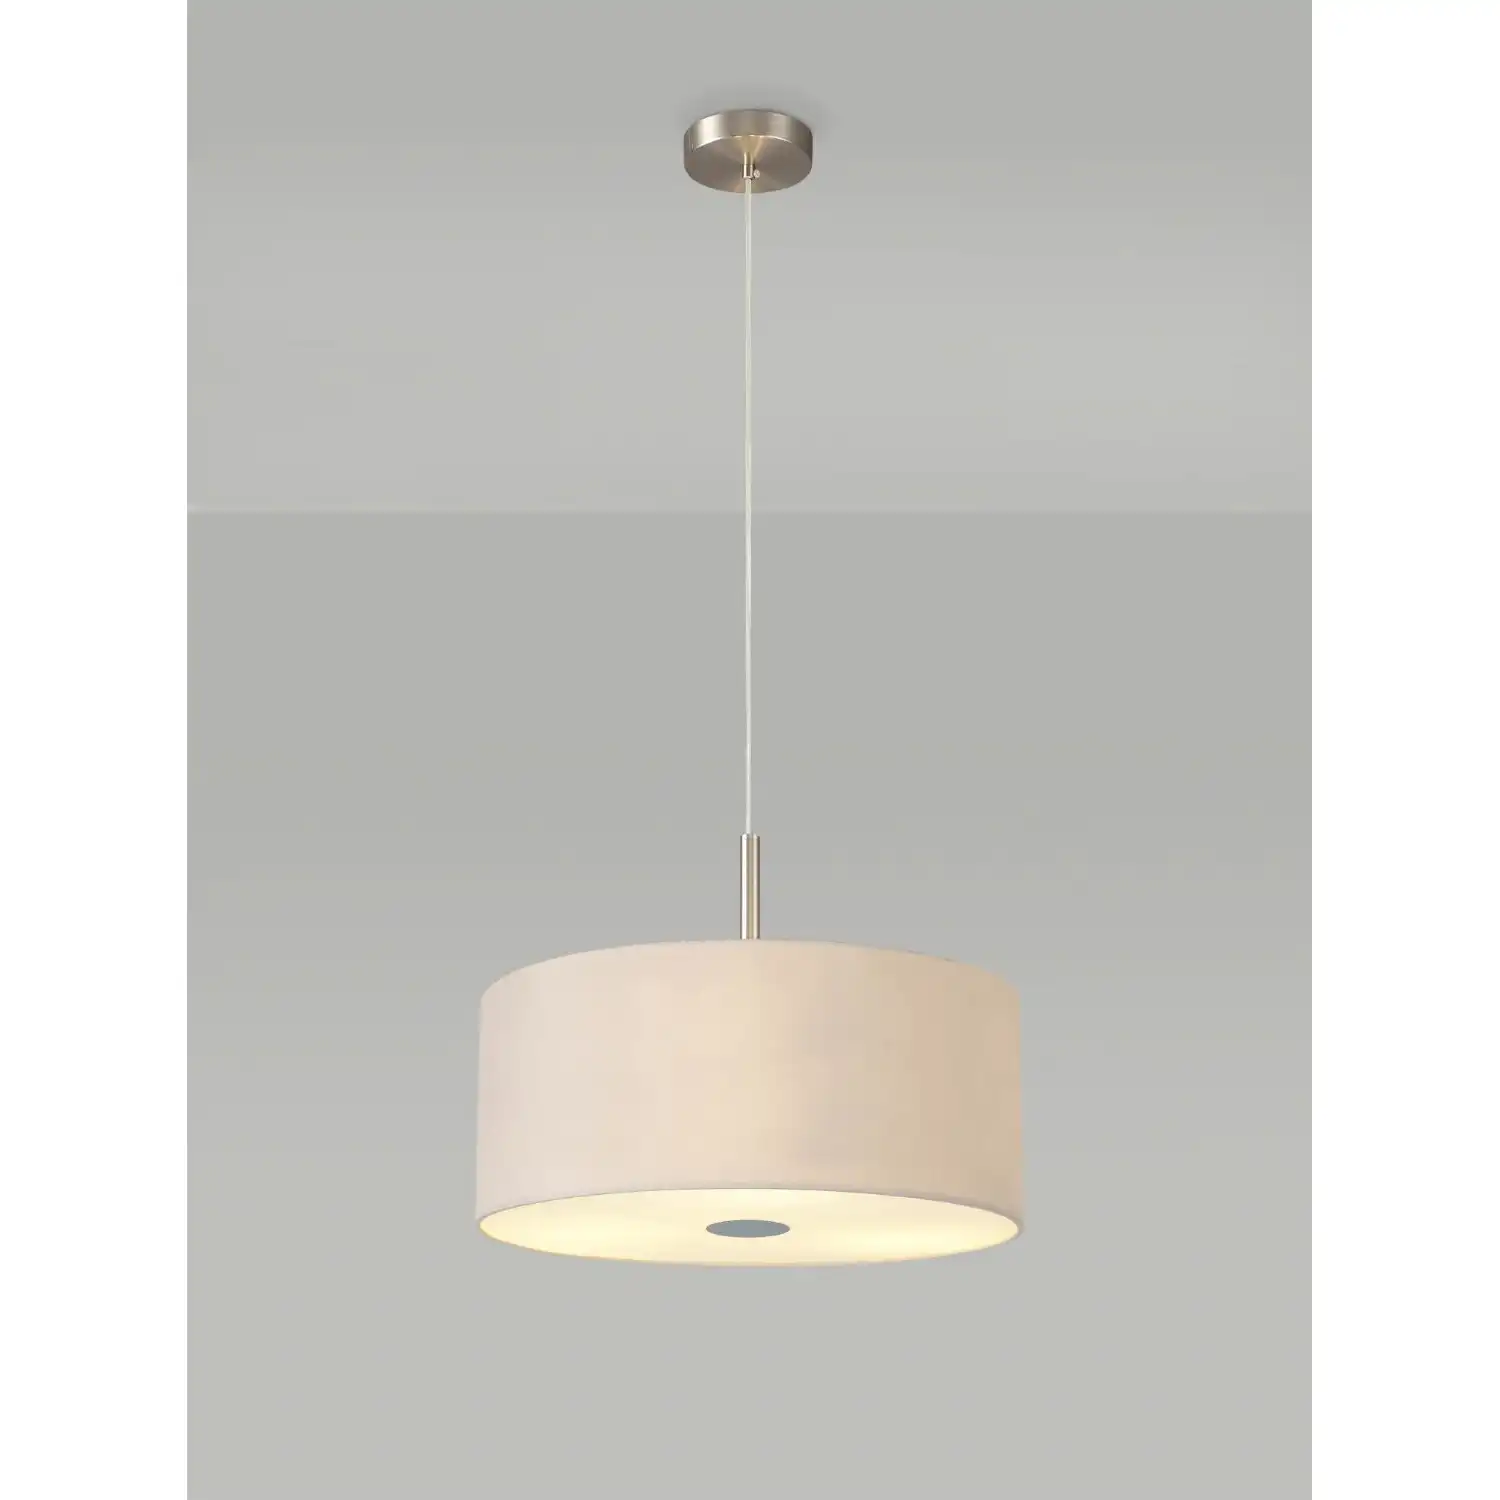 Baymont Satin Nickel 3m 3 Light E27 Single Pendant c w 400 Dual Faux Silk Fabric Shade, Nude Beige Moonlight And 400mm Frosted PC Acrylic Diffuser